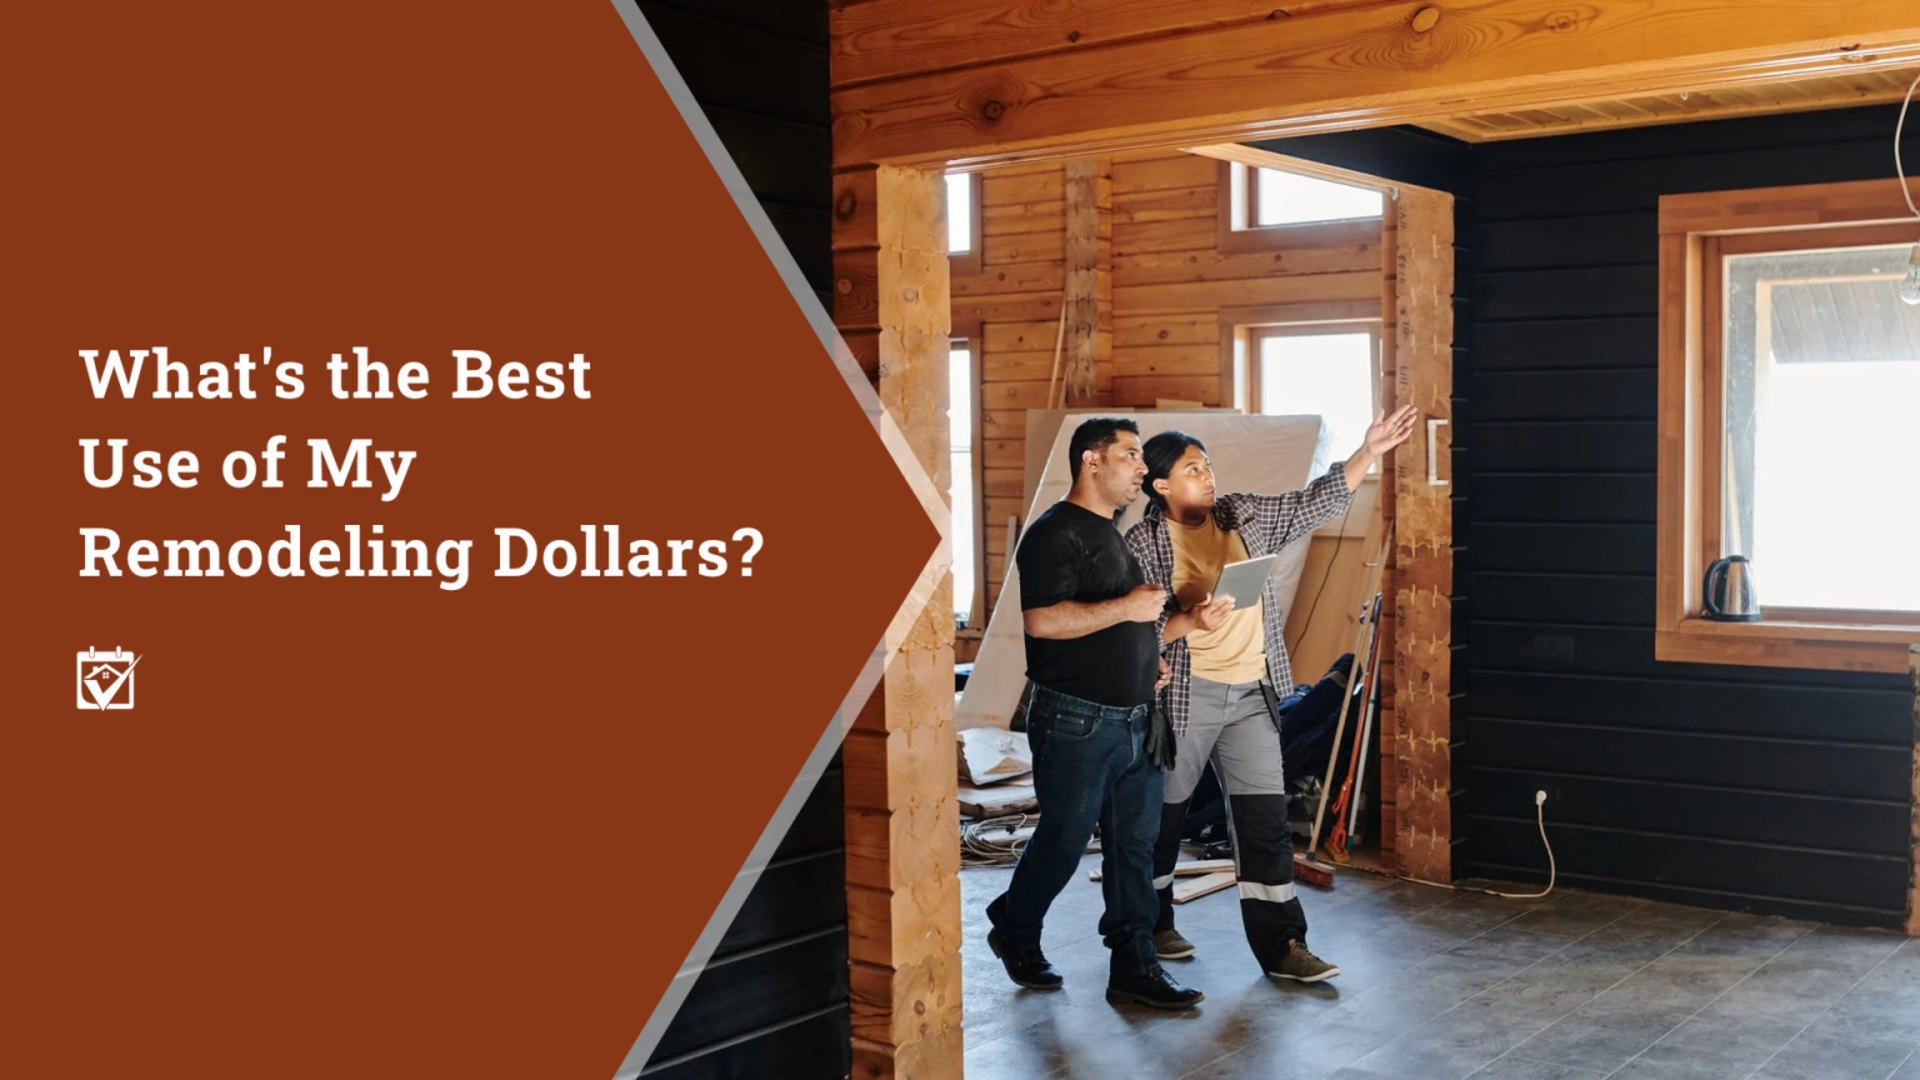 What’s the Best Use of My Remodeling Dollars?